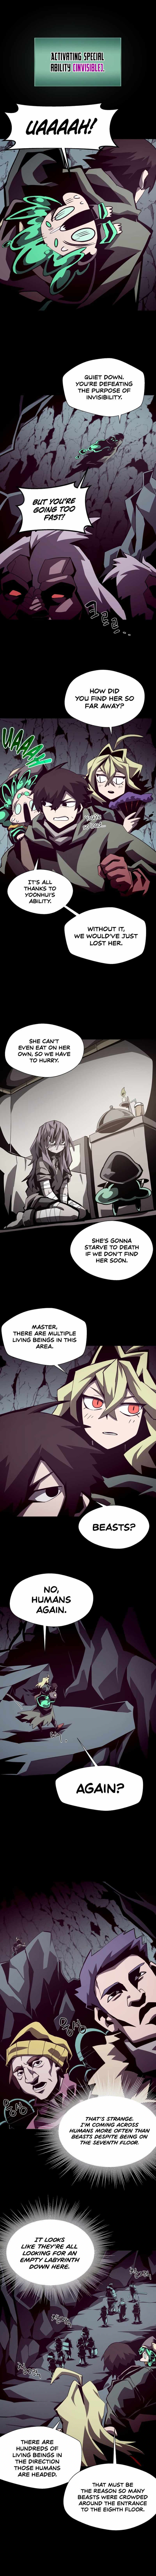 Dungeon Odyssey - Page 4